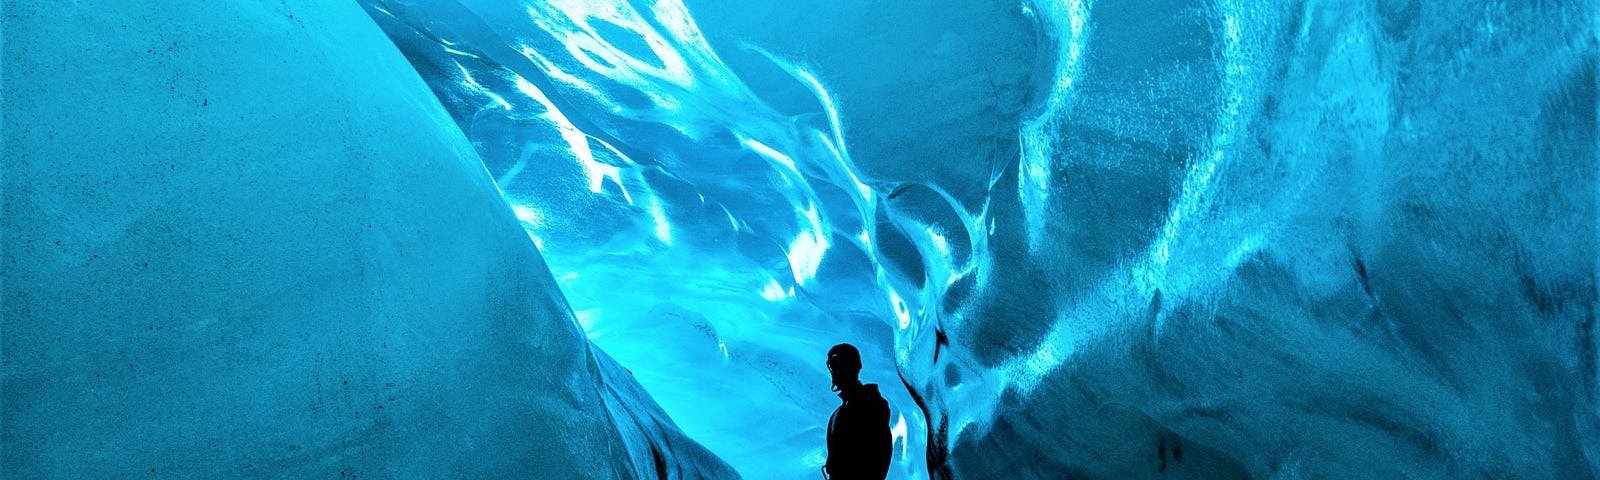 silhouette of man in blue ice cave